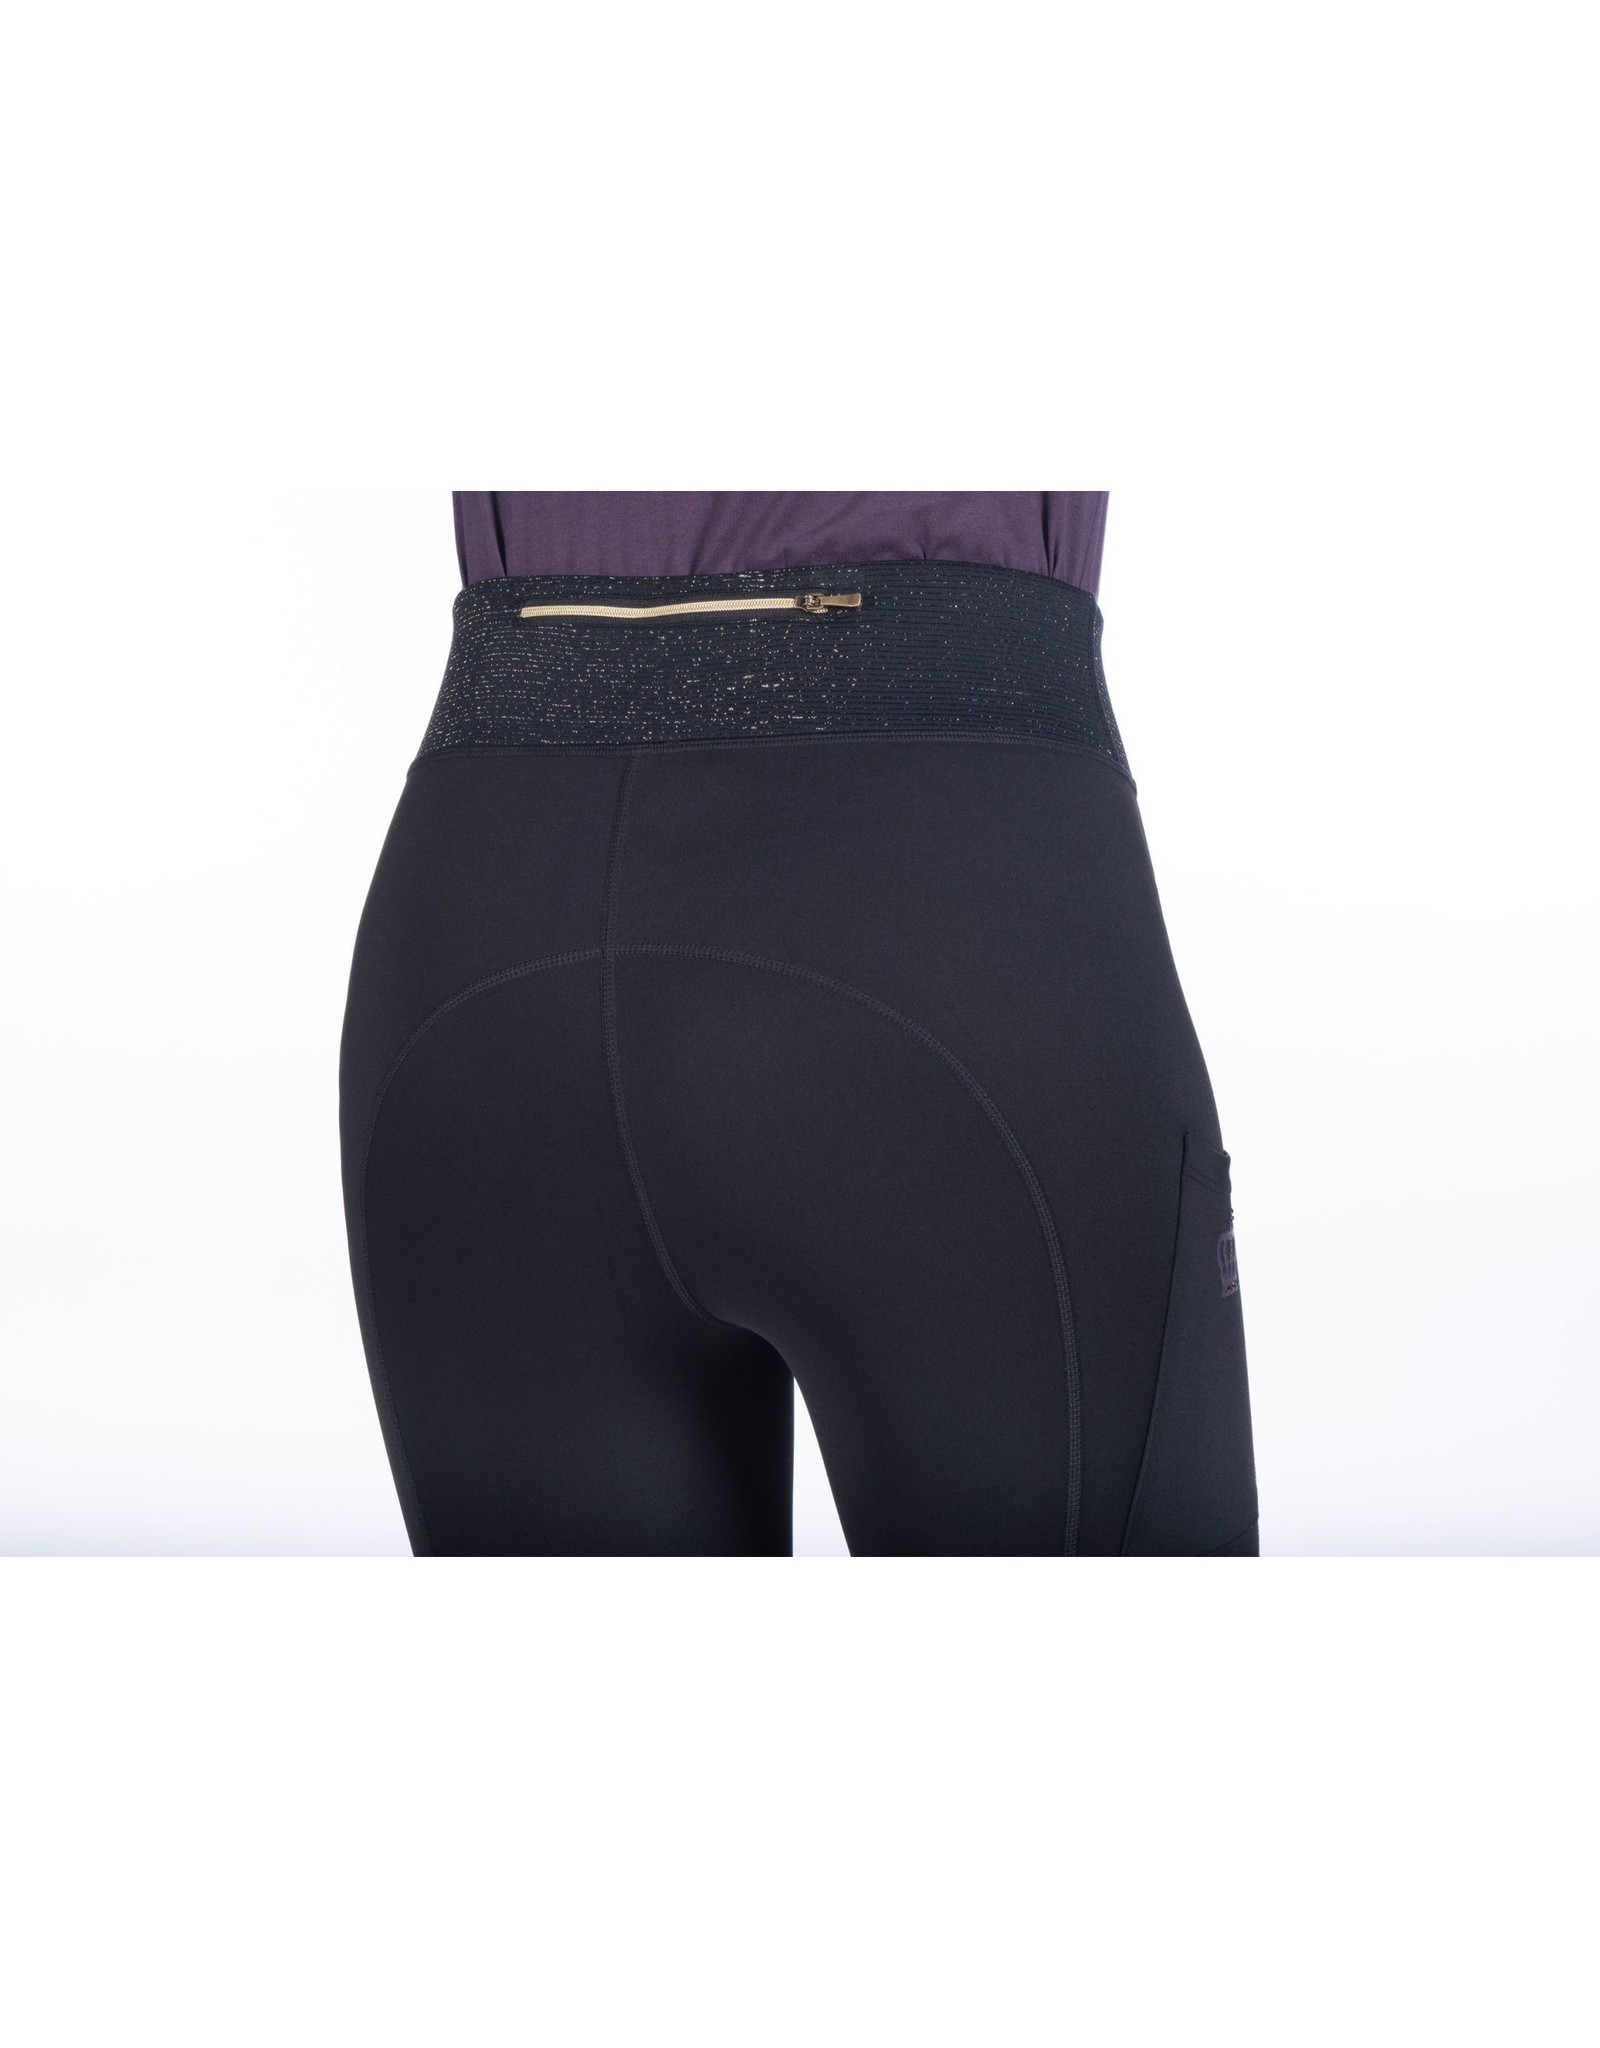 HKM Riding Leggings Lavender Bay Silicone Knee Patch